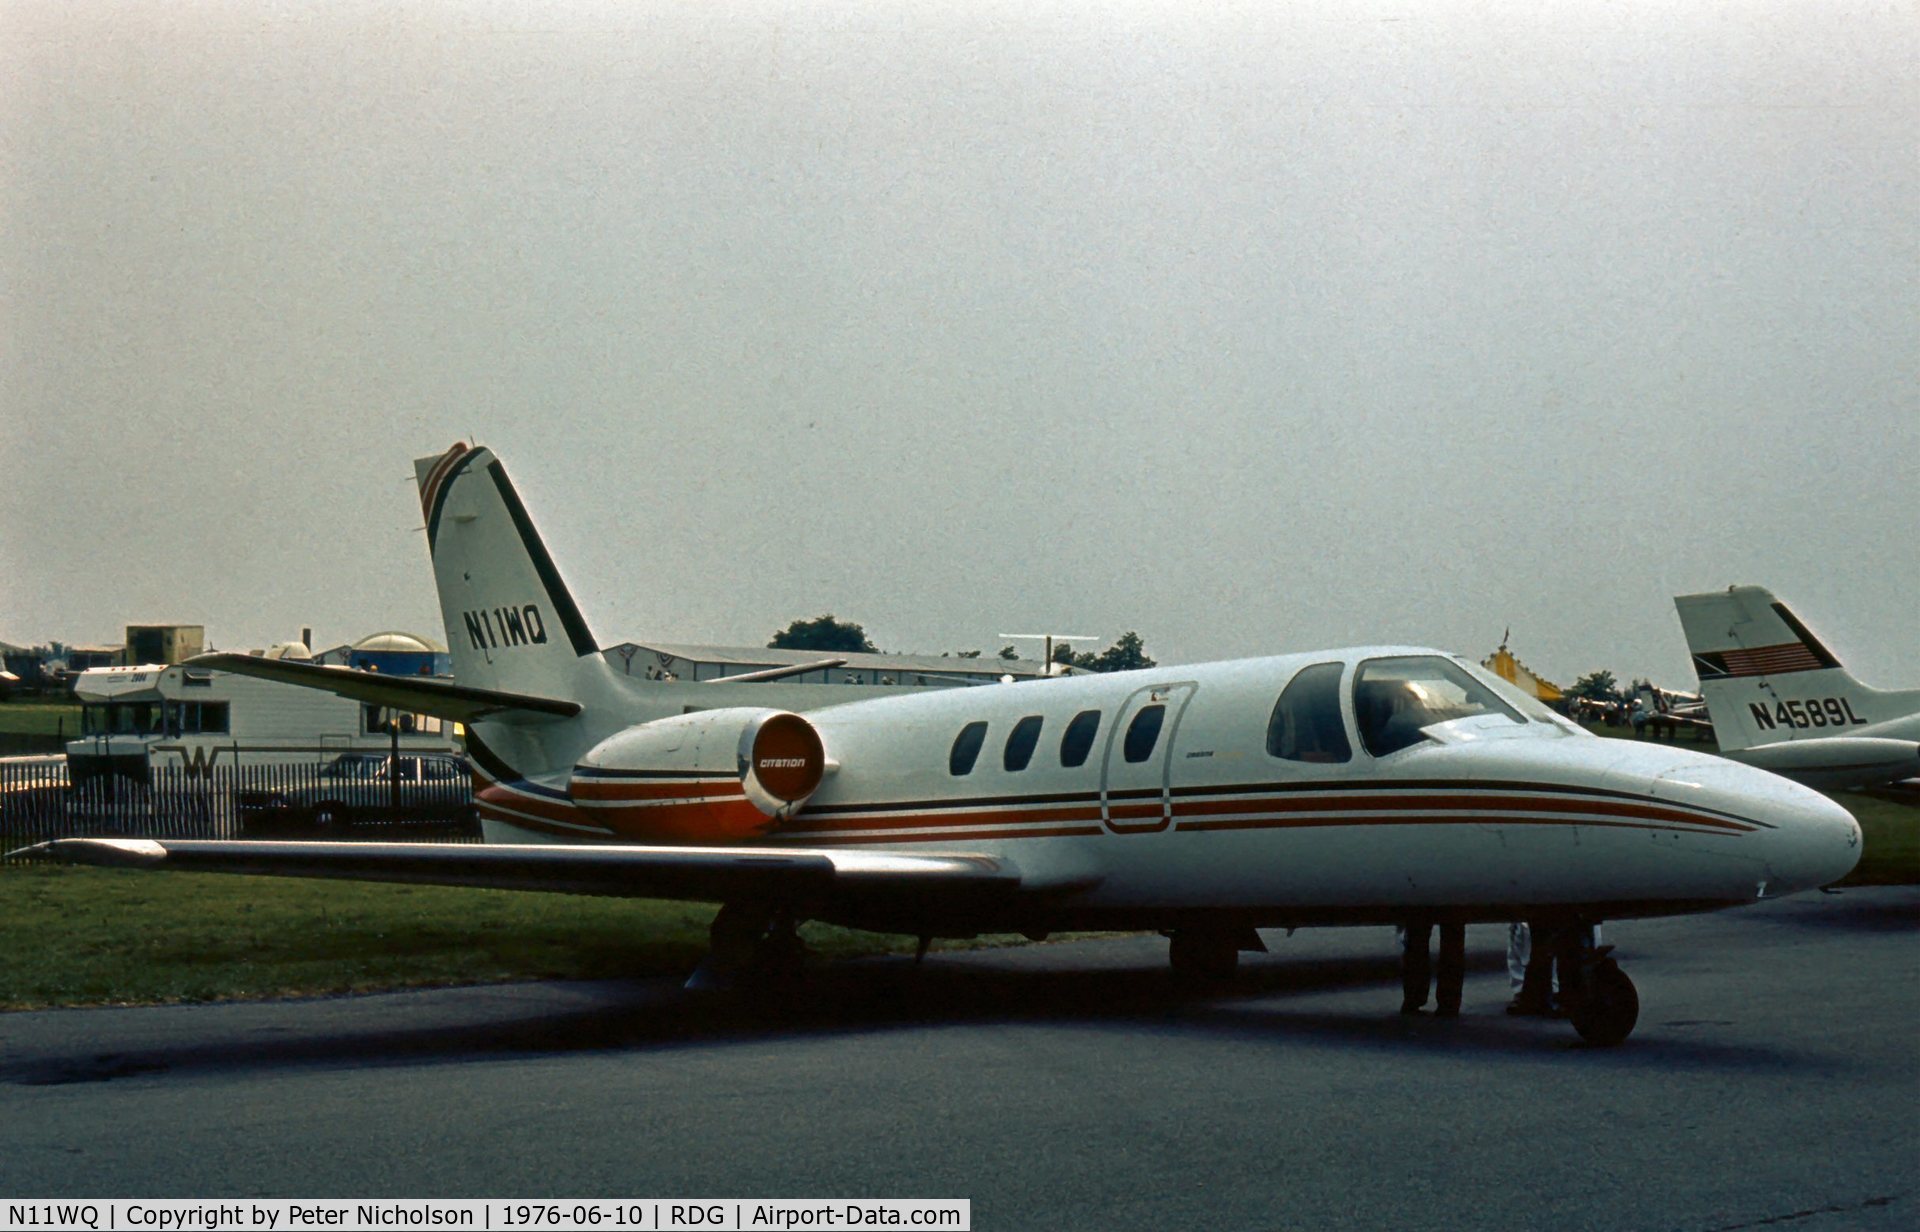 N11WQ, 1973 Cessna 500 Citation I C/N 500-0058, This Citation I was present at the 1976 Reading Airshow.